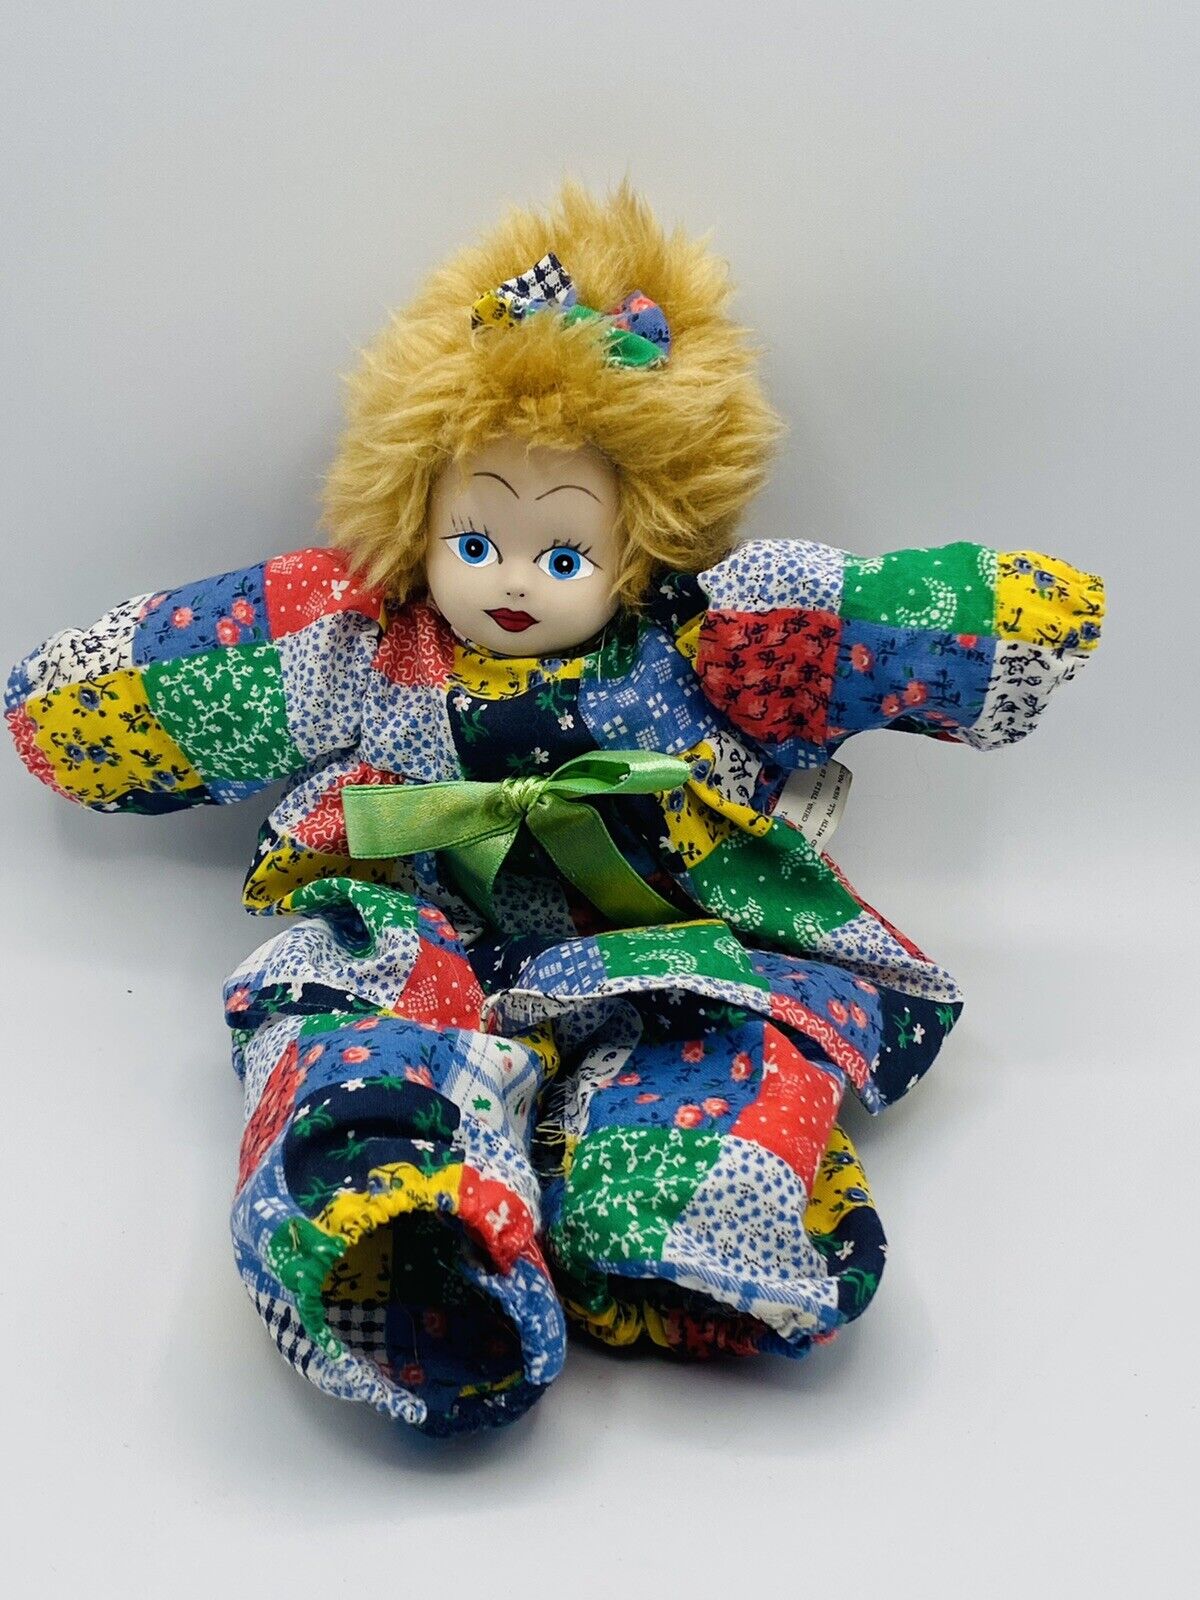 Clown Doll Collectible Porcelain Ceramic Pretty Face Patchwork Outfit